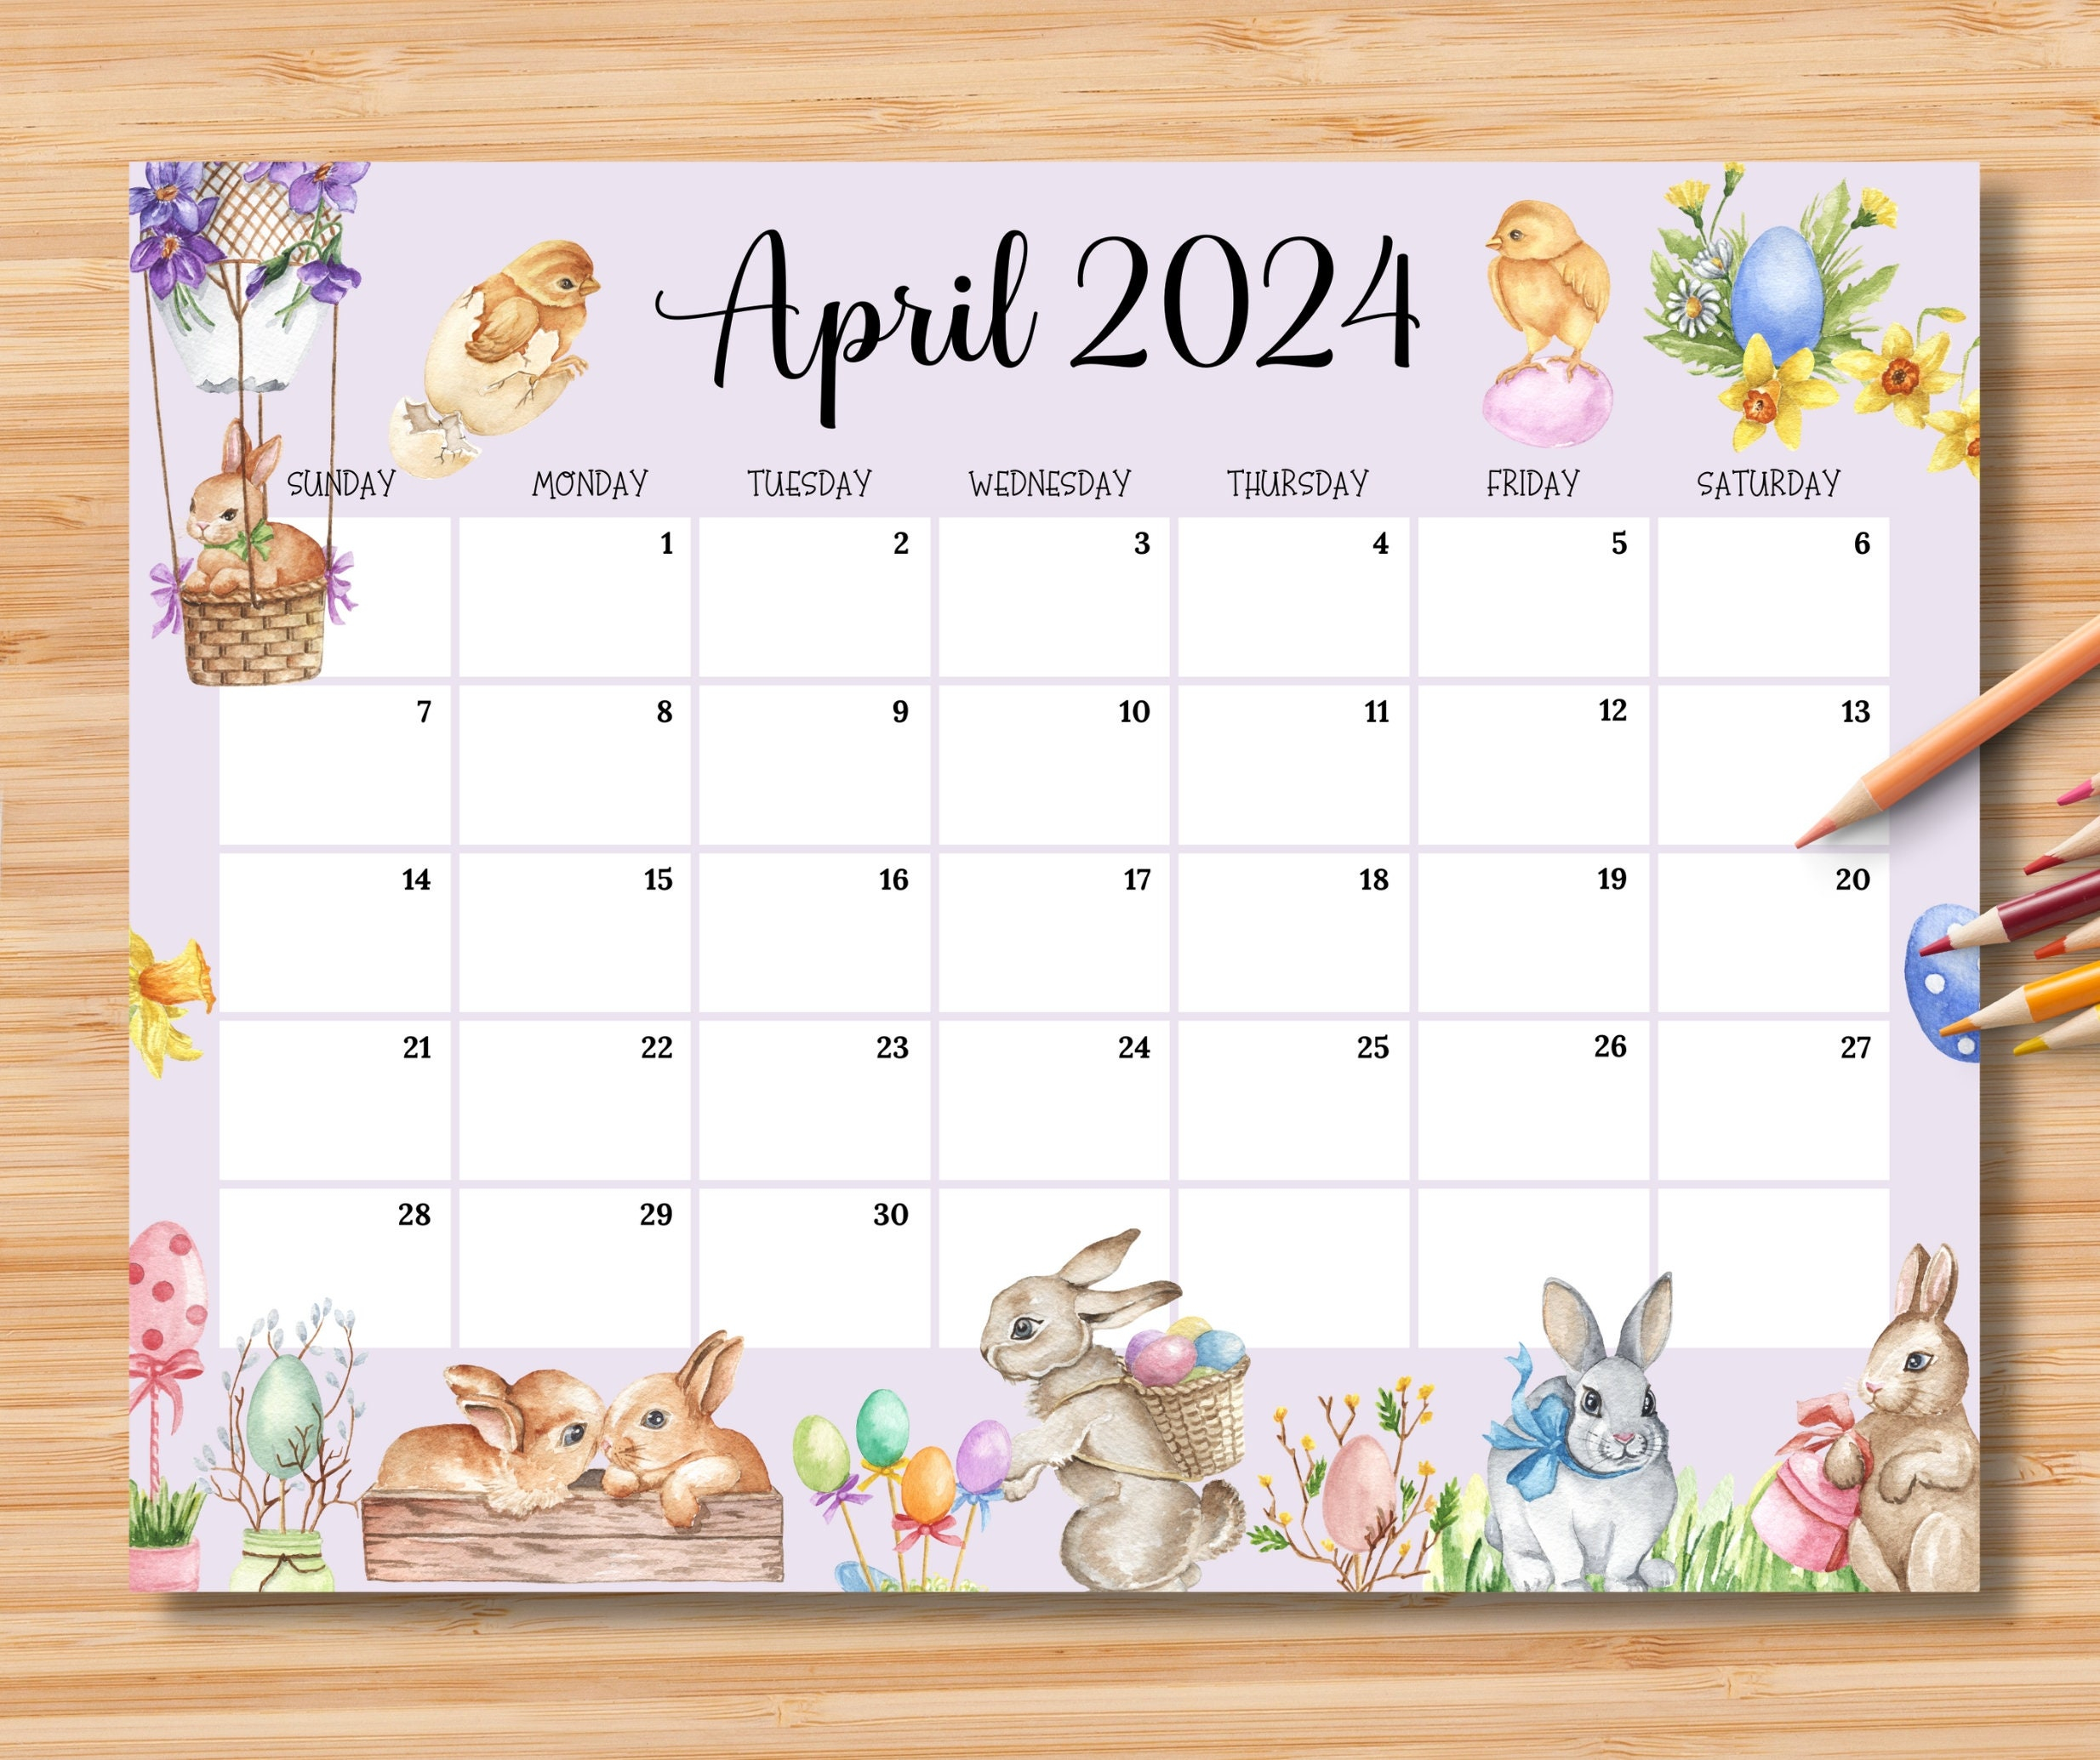 Editable April 2024 Calendar, Happy Easter Day 2024 With Cute with Editable April 2024 Calendar